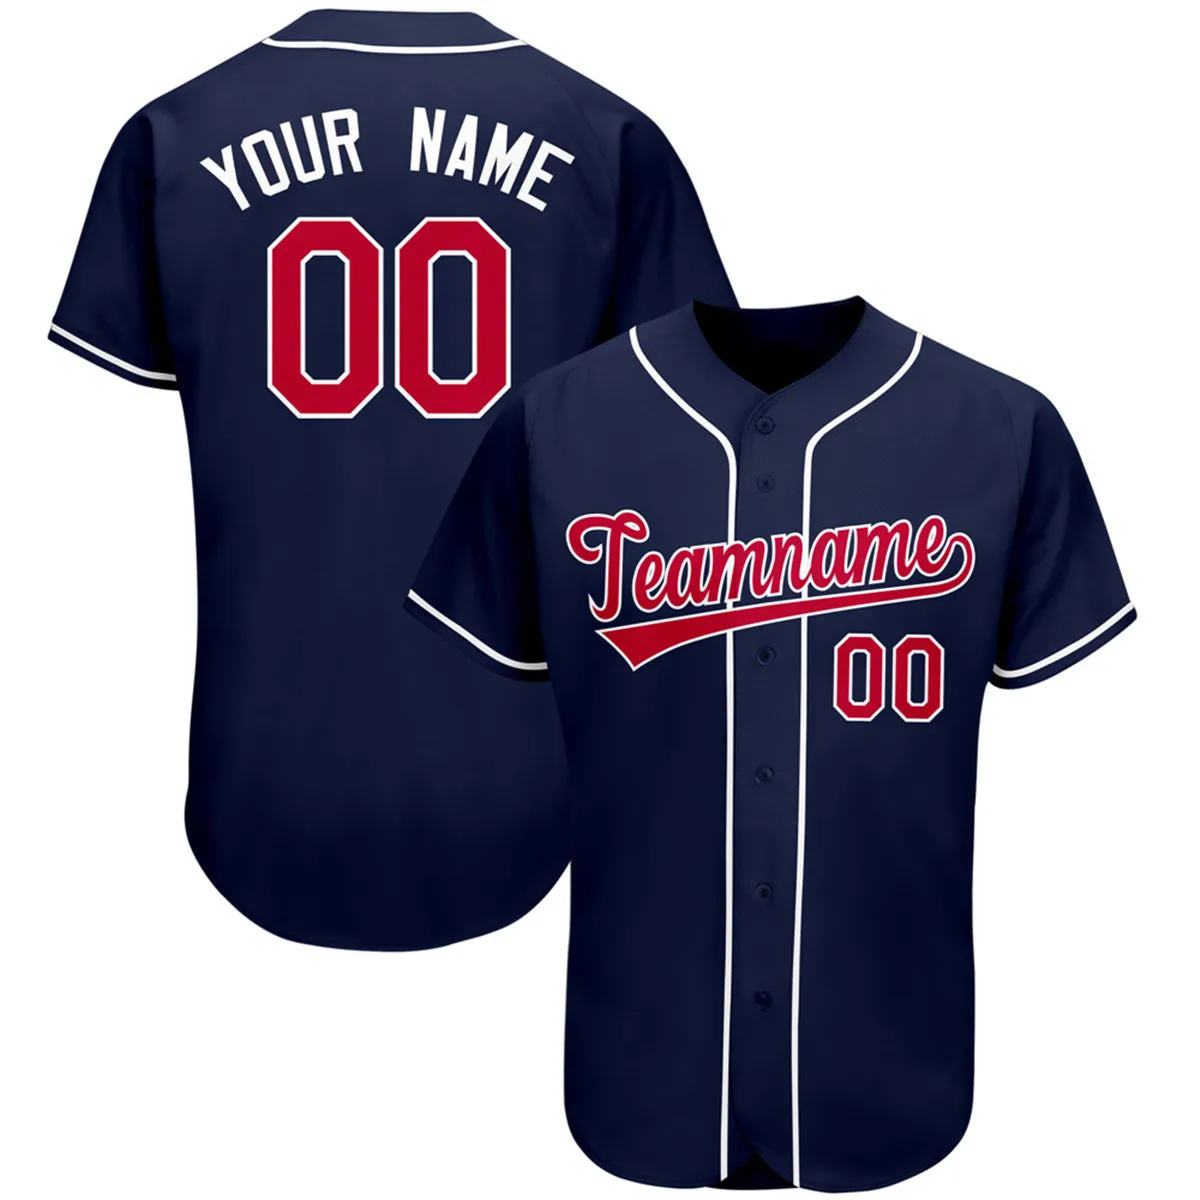 

Custom Baseball Jersey Team Clothing Customized Your Name Number Mesh Soft V-Neck Streetwear Male Women Child Any Coloure Style